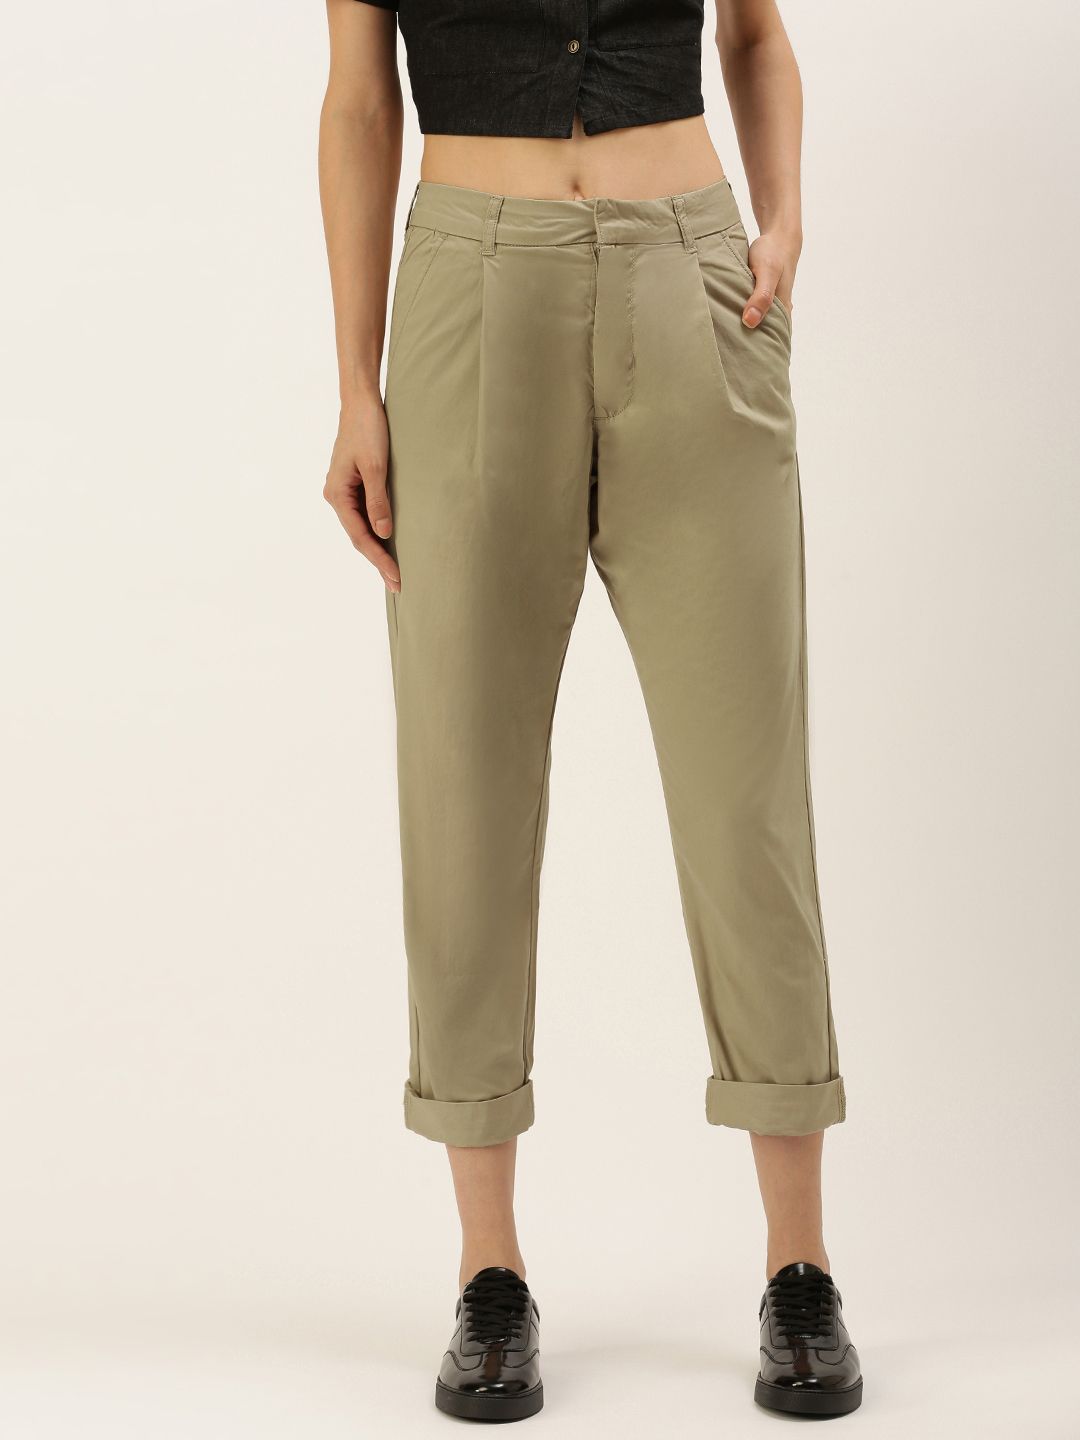 FOREVER 21 Women Khaki Trousers Price in India